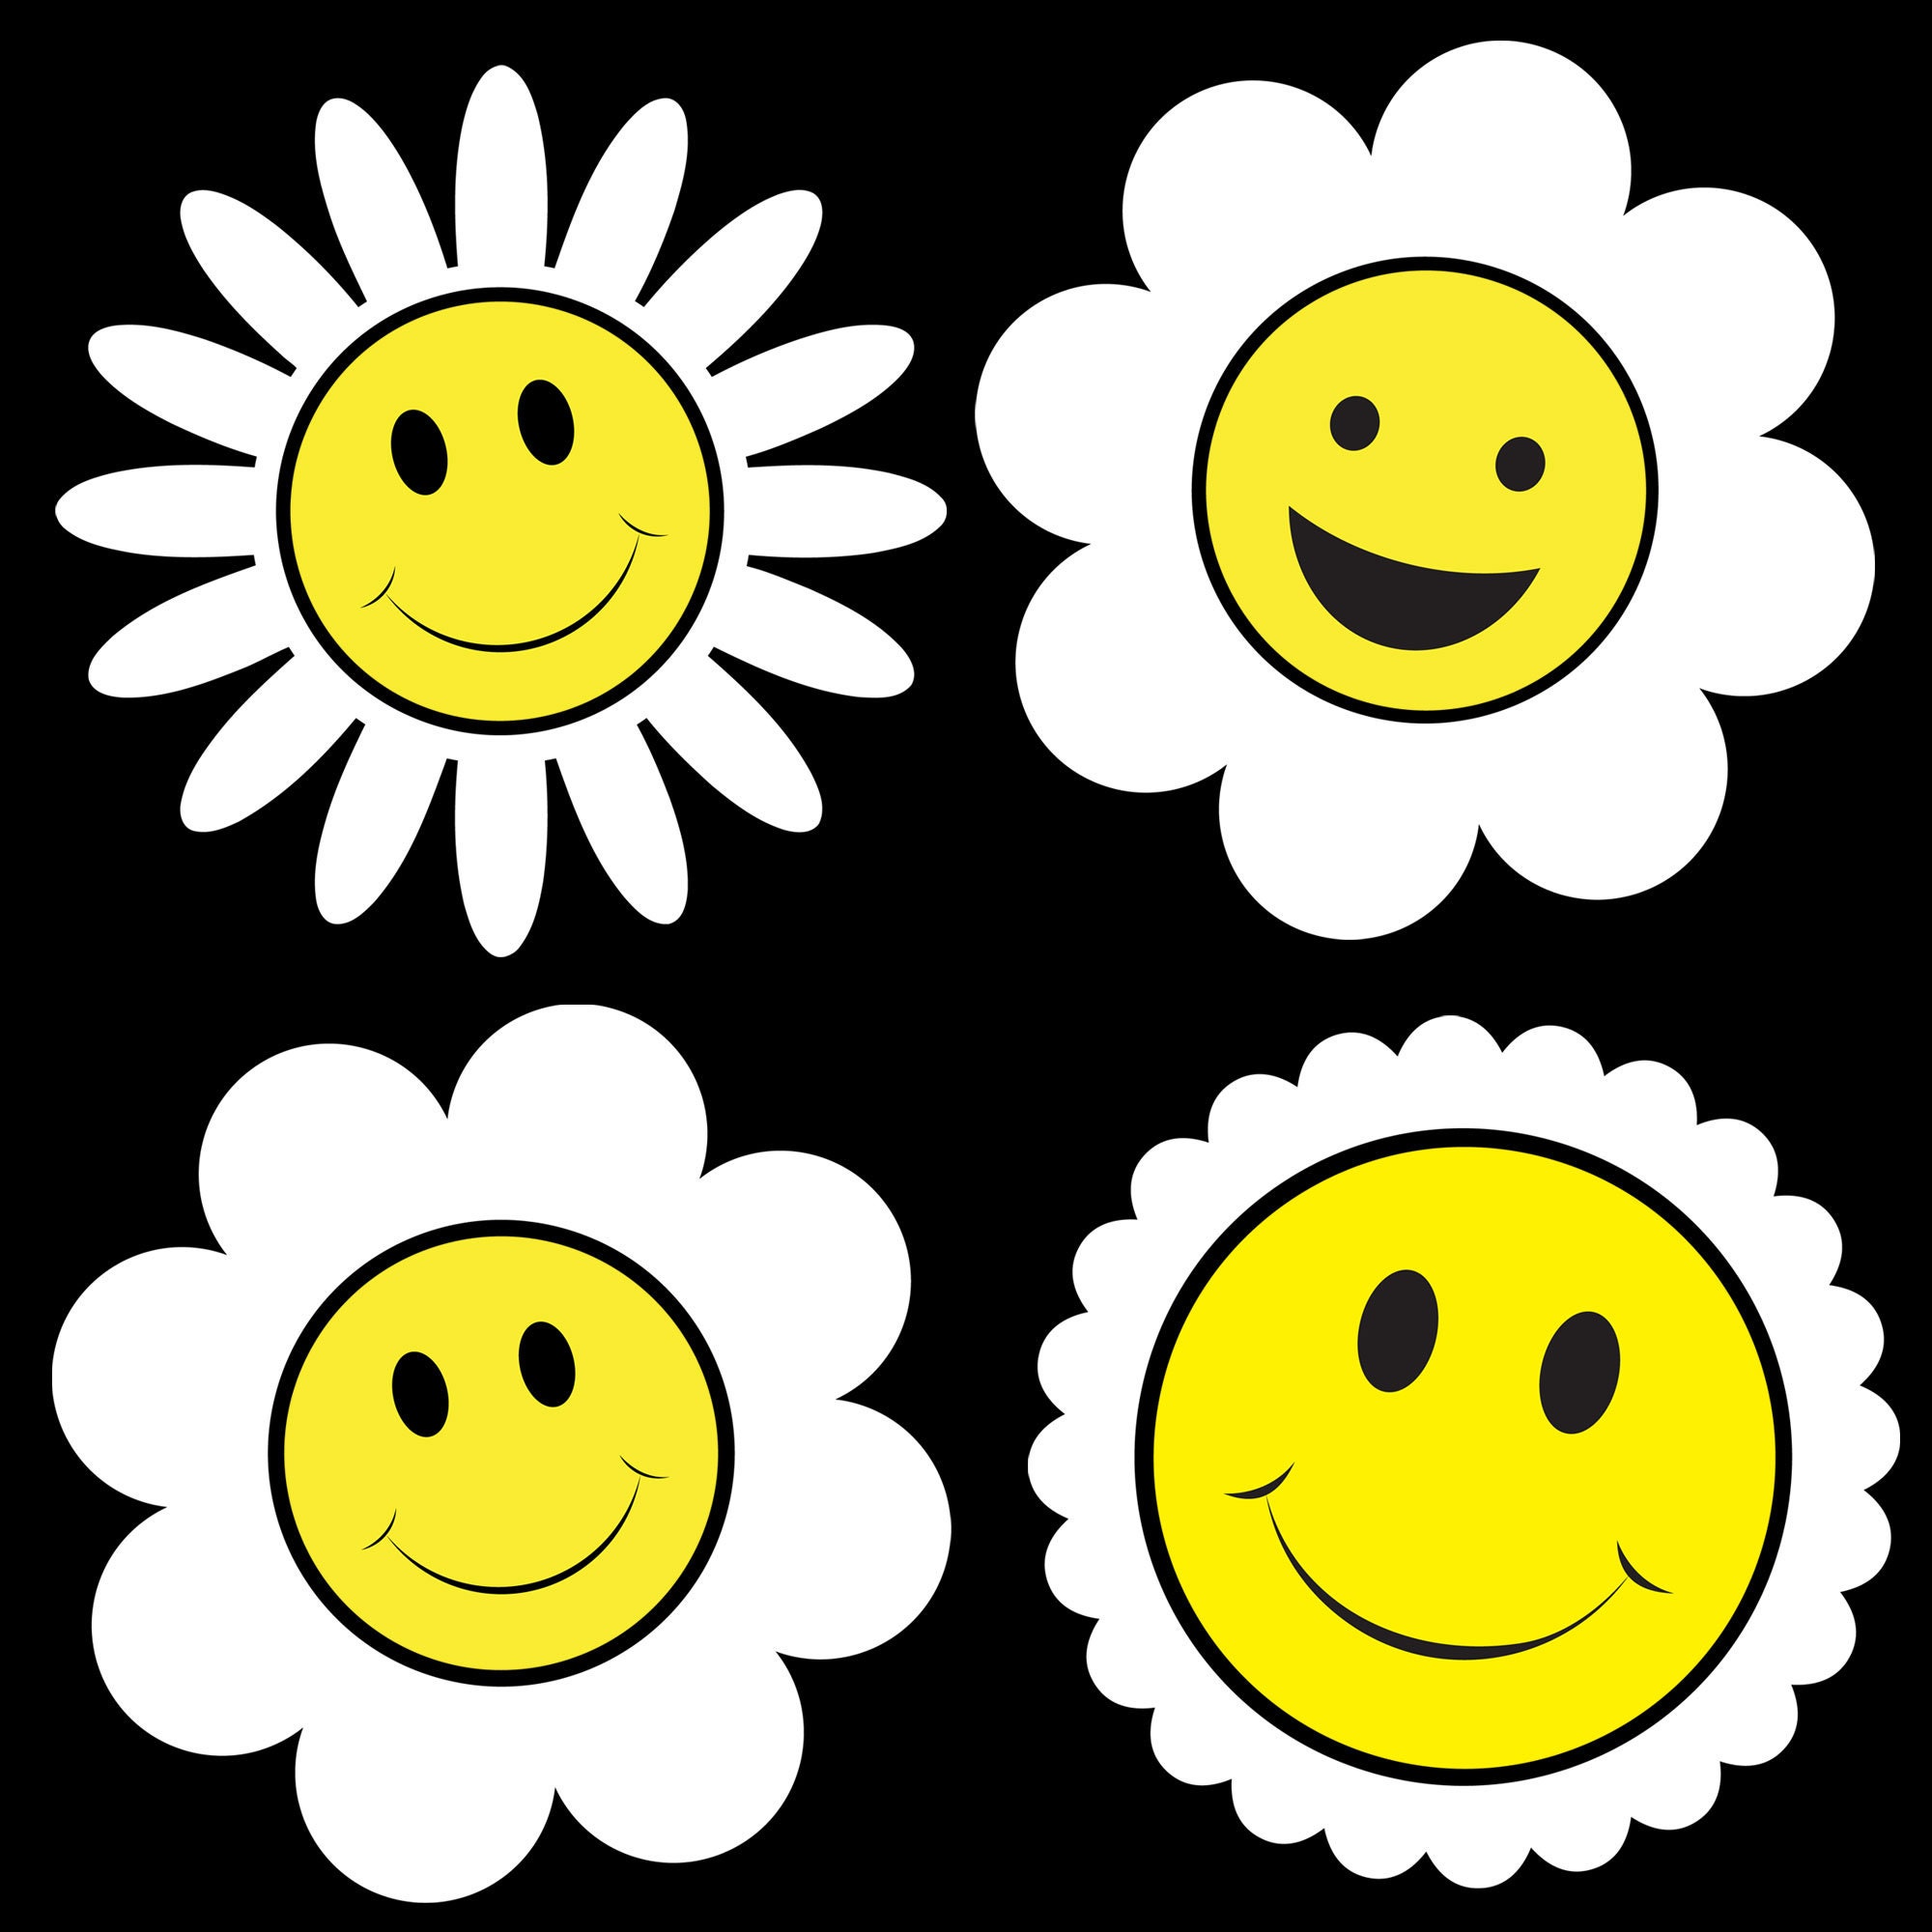 Smiley Face Flower Stock Vector Illustration and Royalty Free Smiley Face  Flower Clipart